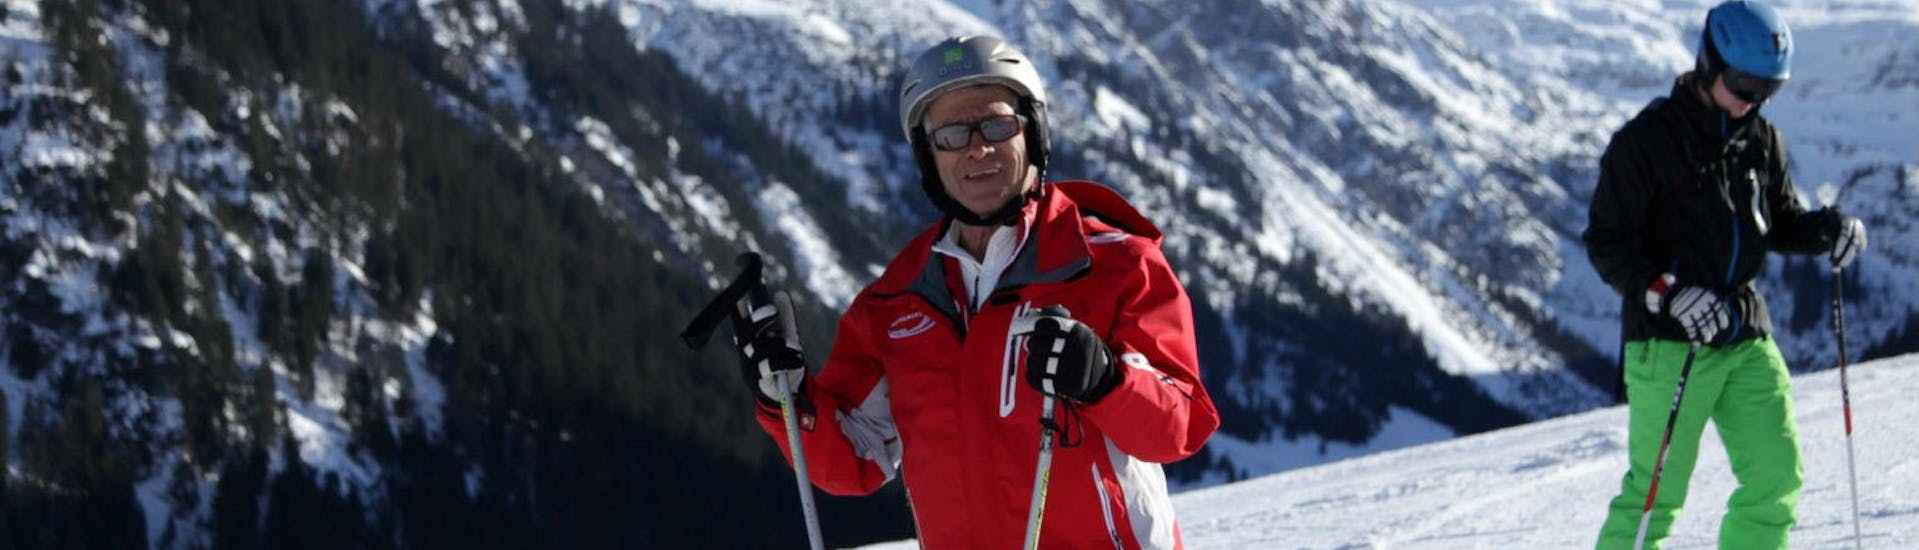 One instructor from Skischule Mittelberg on the slopes ready to teach Adult Ski Lessons for Advanced Skiers.